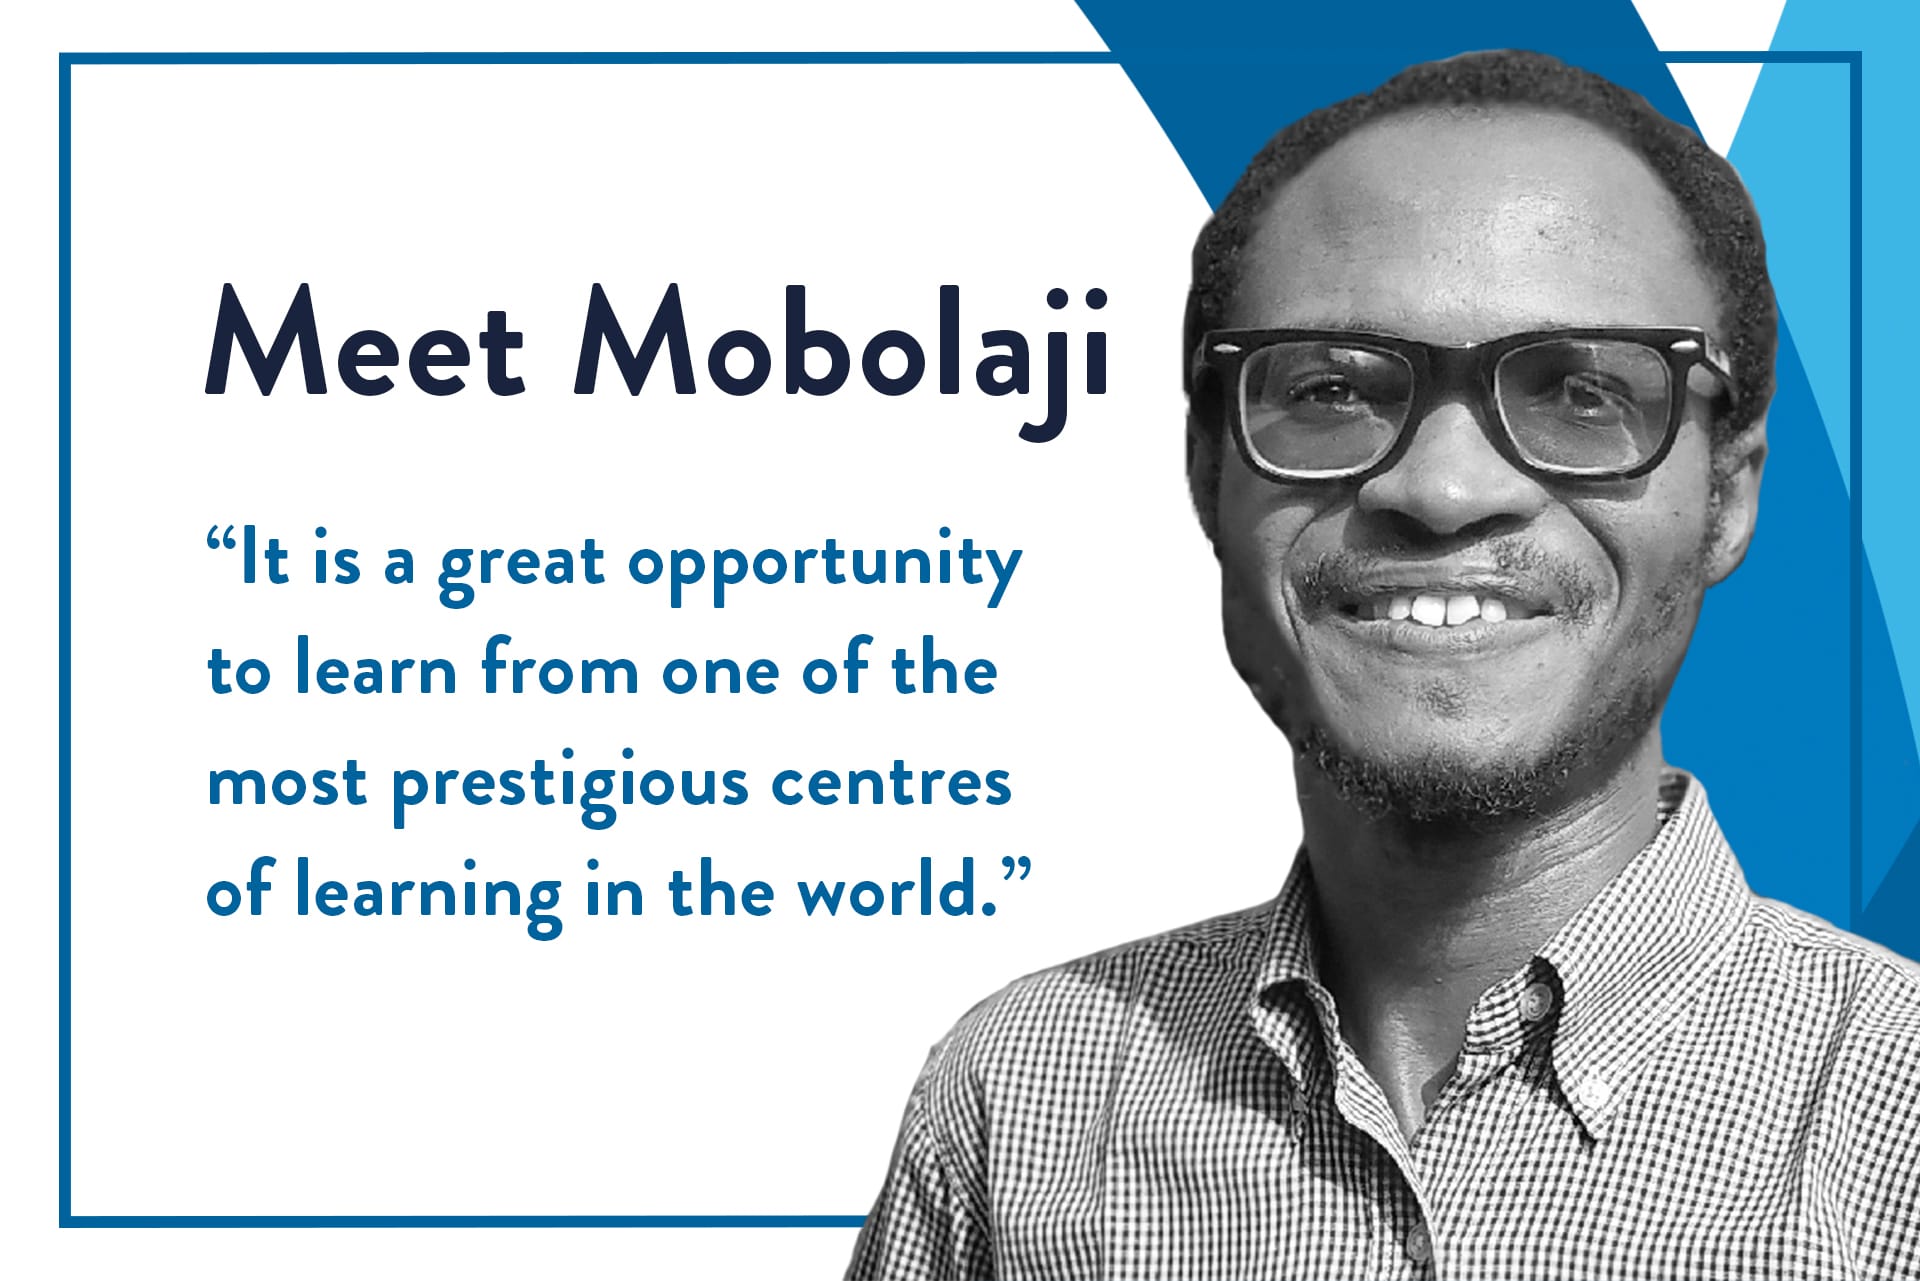 Blog header with a photo of the student, a title that reads 'Meet Mobolaji' and a quote that reads: 'It is a great opportunity to learn from one of the most prestigious centres of learning in the world.'